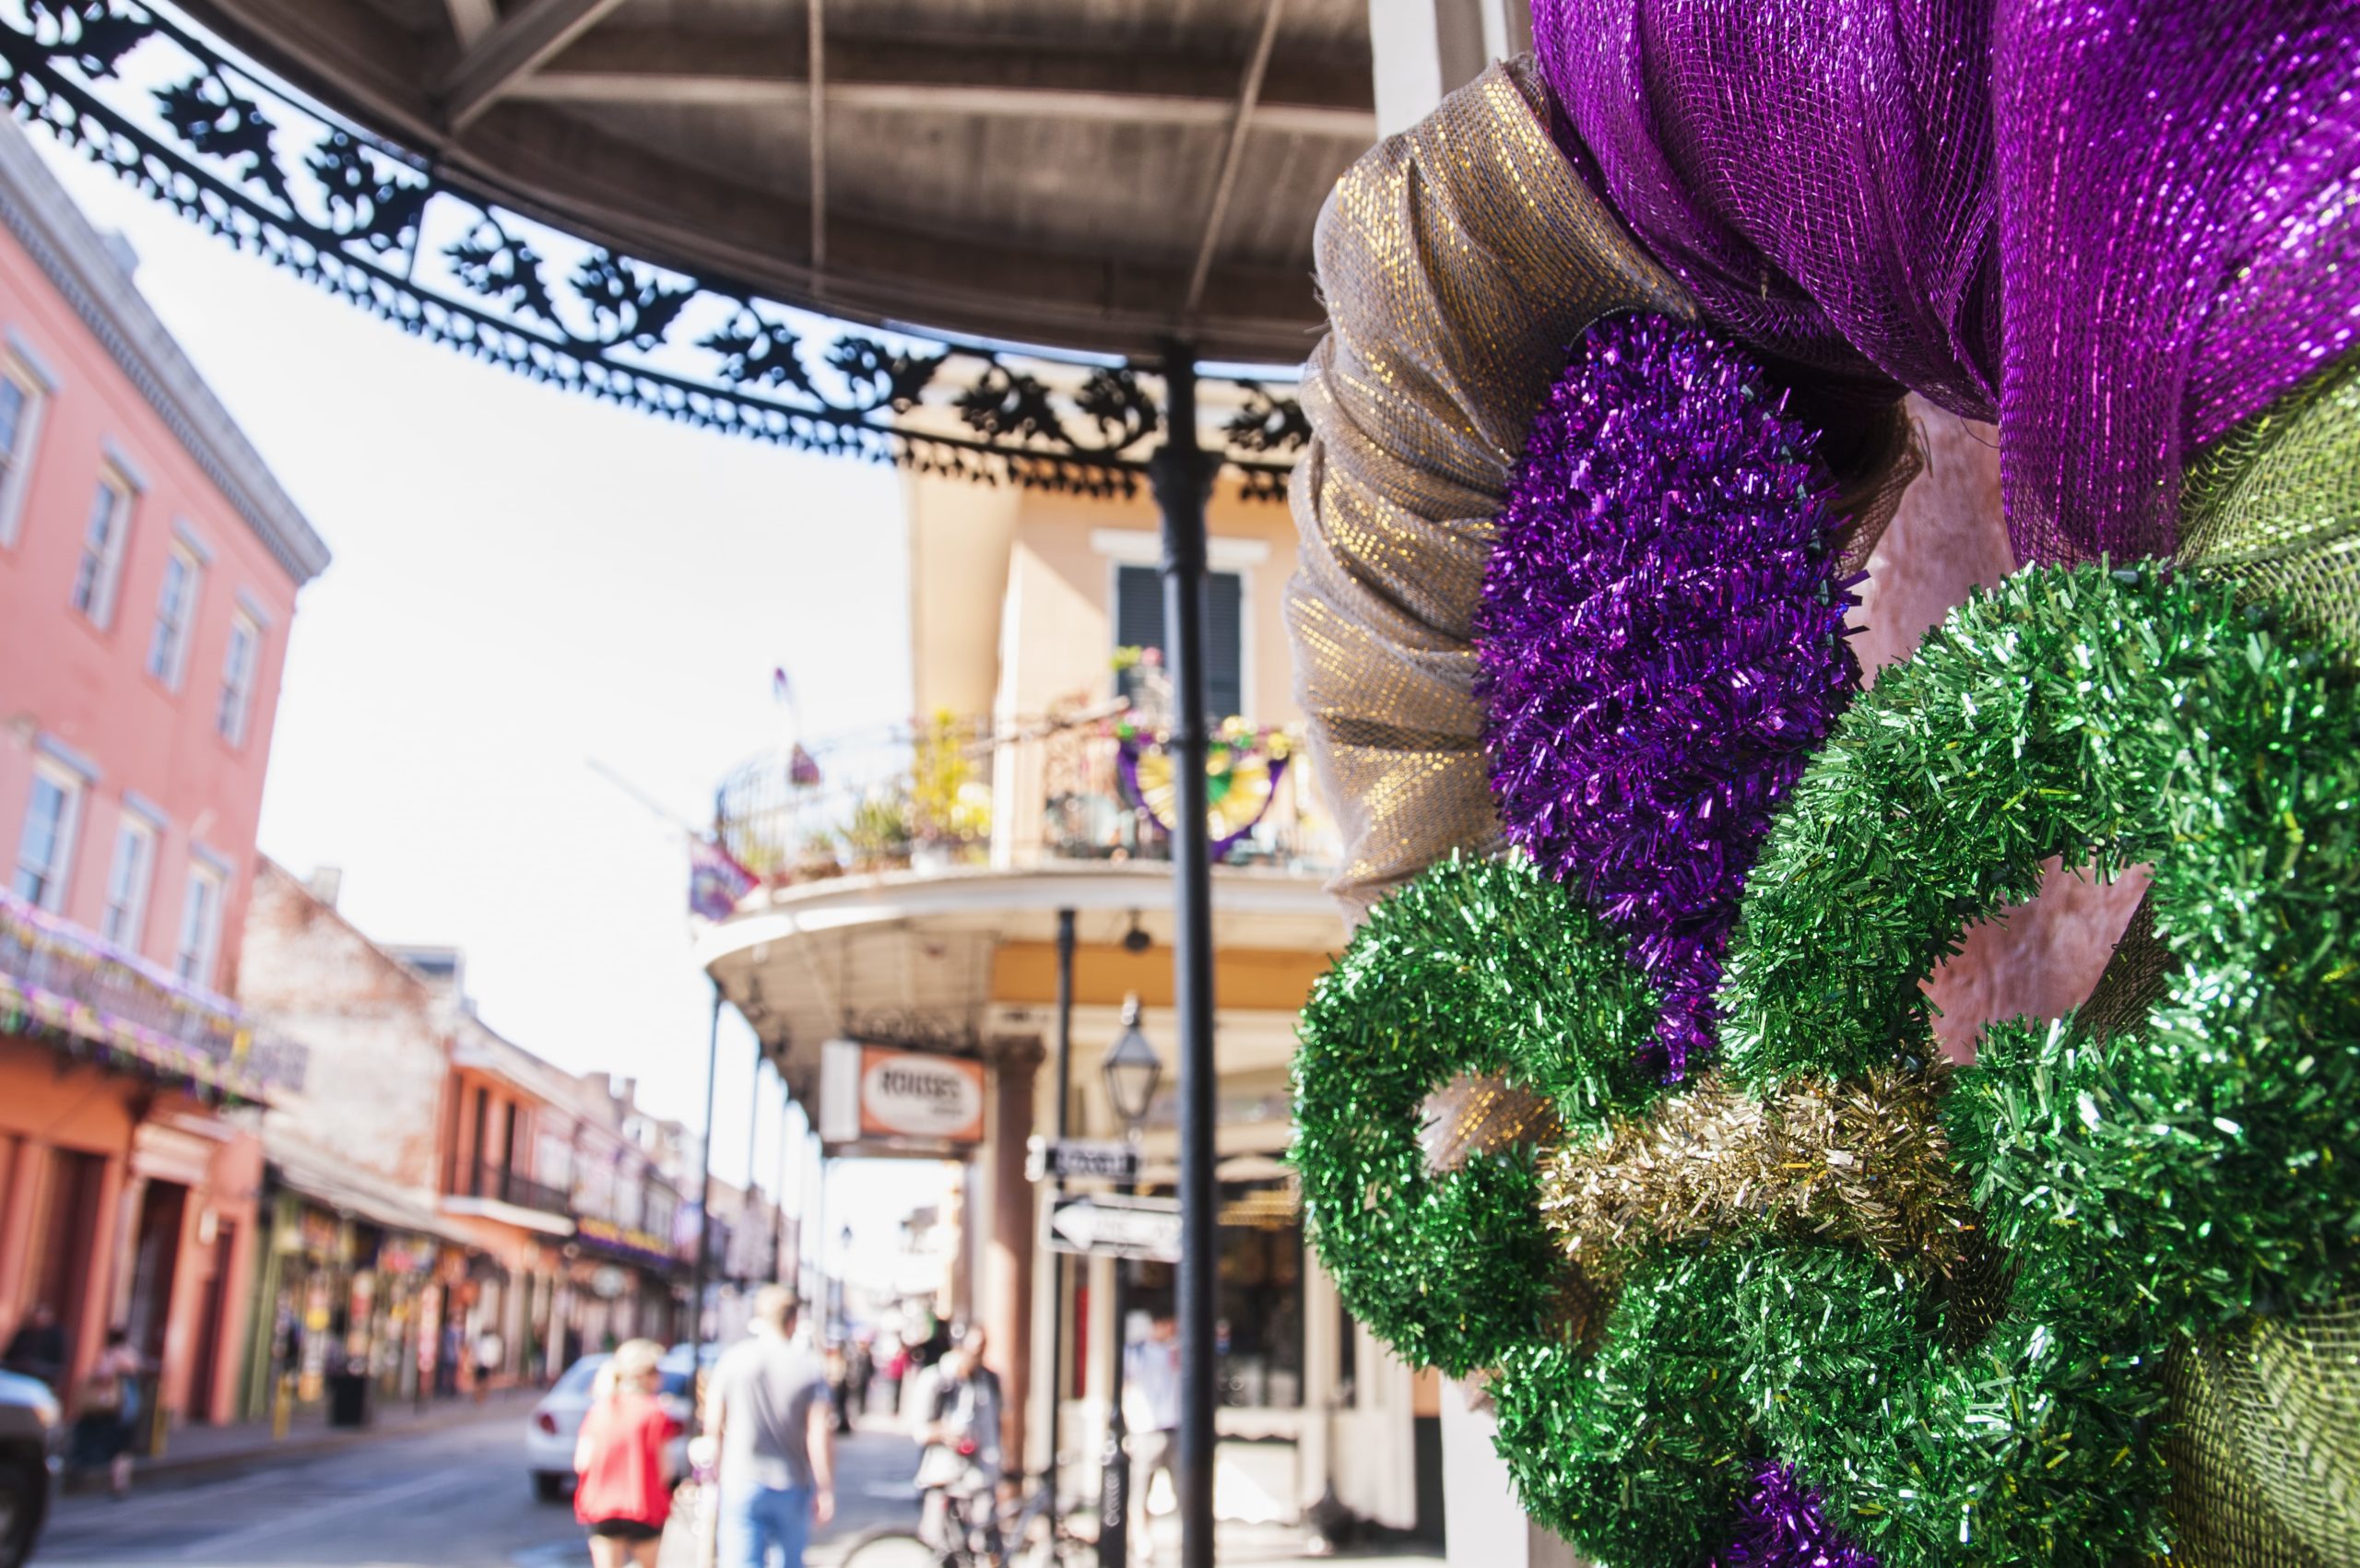 USA, New Orleans, Louisiana, Fleur de Lys and street in background